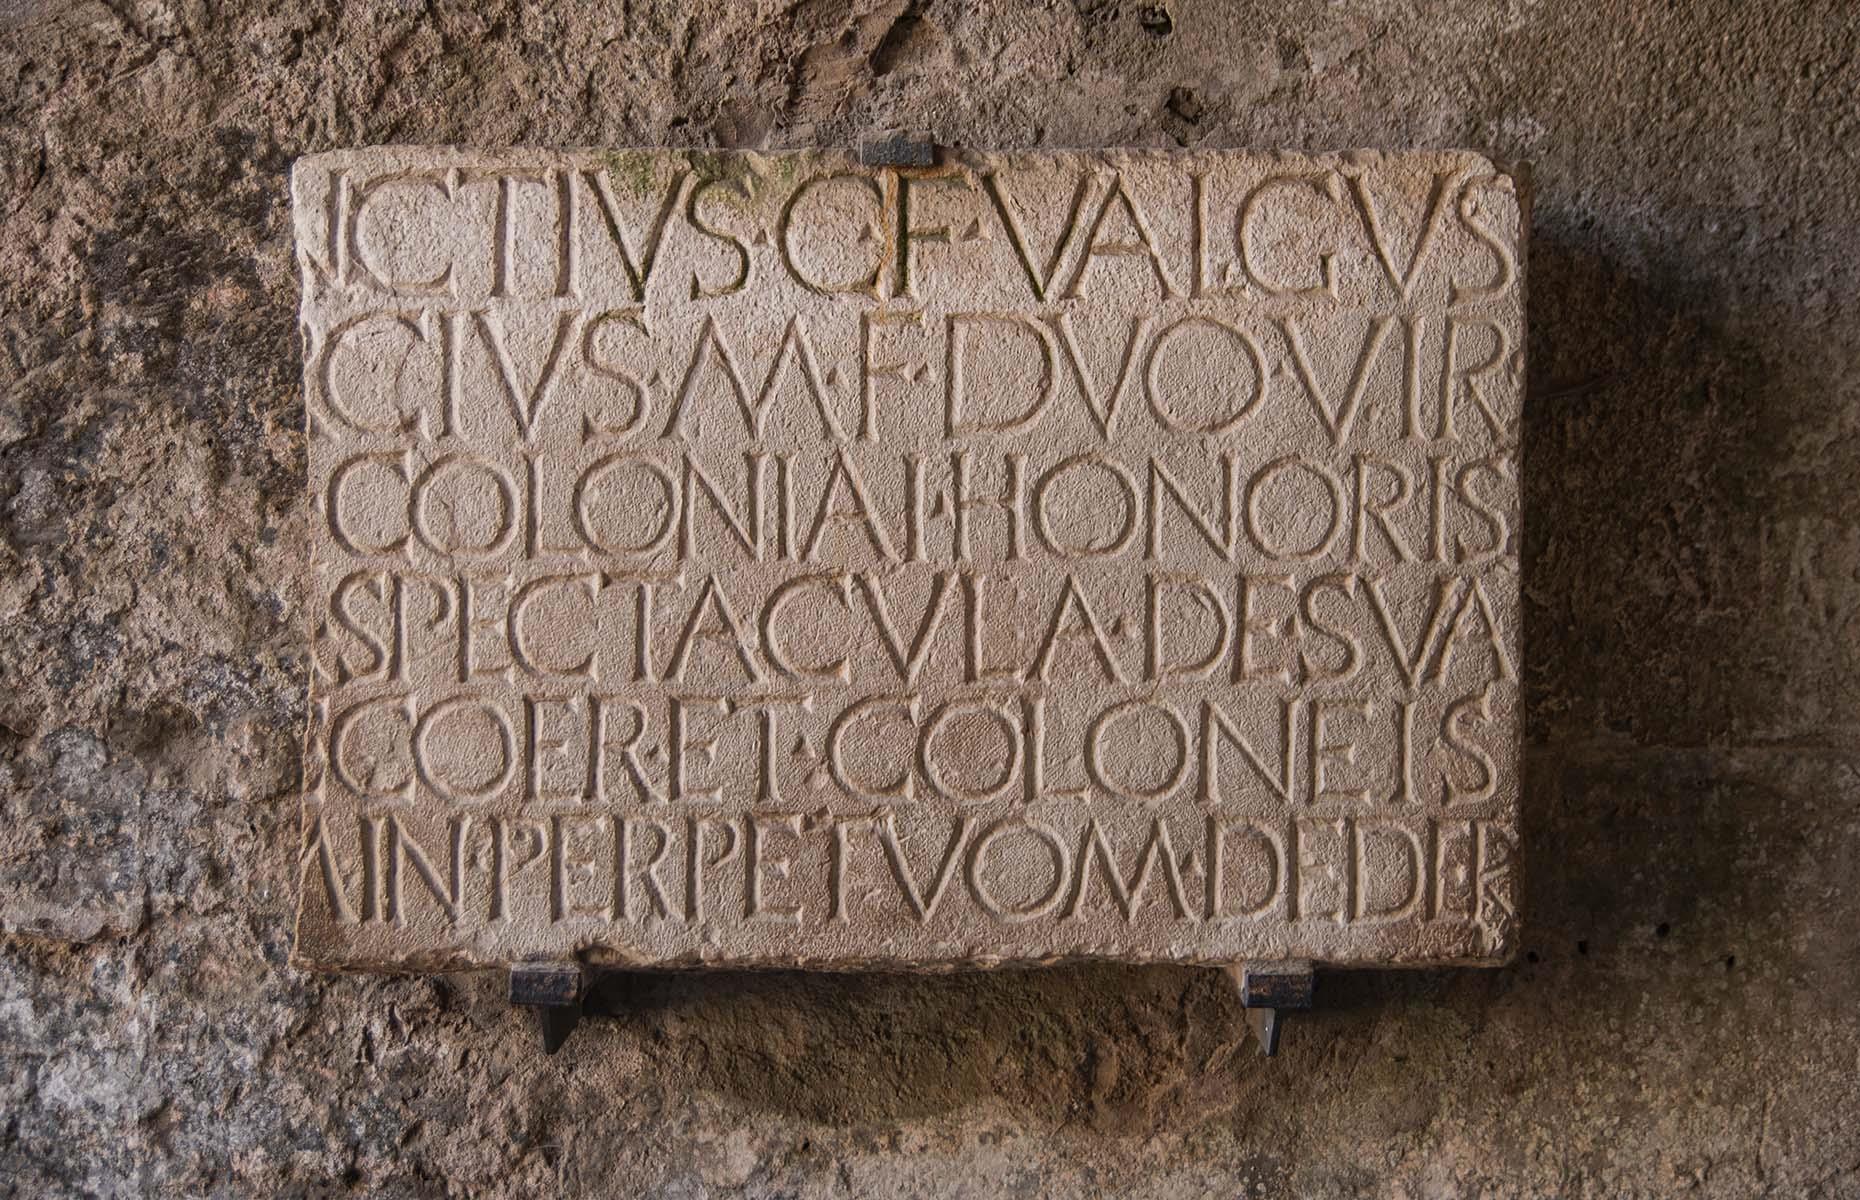 <p>For many years, the site was only referred to as La Cività as there was no way of being certain about which town or city it was – but that changed thanks to a discovery made in 1763. An inscription was found that read: ‘Rei publicae Pompeianorum’, which meant scholars could at last link the site with the written references to the tragedy of Pompeii – including those from Pliny the Younger.</p>  <p>That also halted some of the sloppier methods of excavation and led to a better understanding of the need to preserve this one-of-a-kind site.</p>